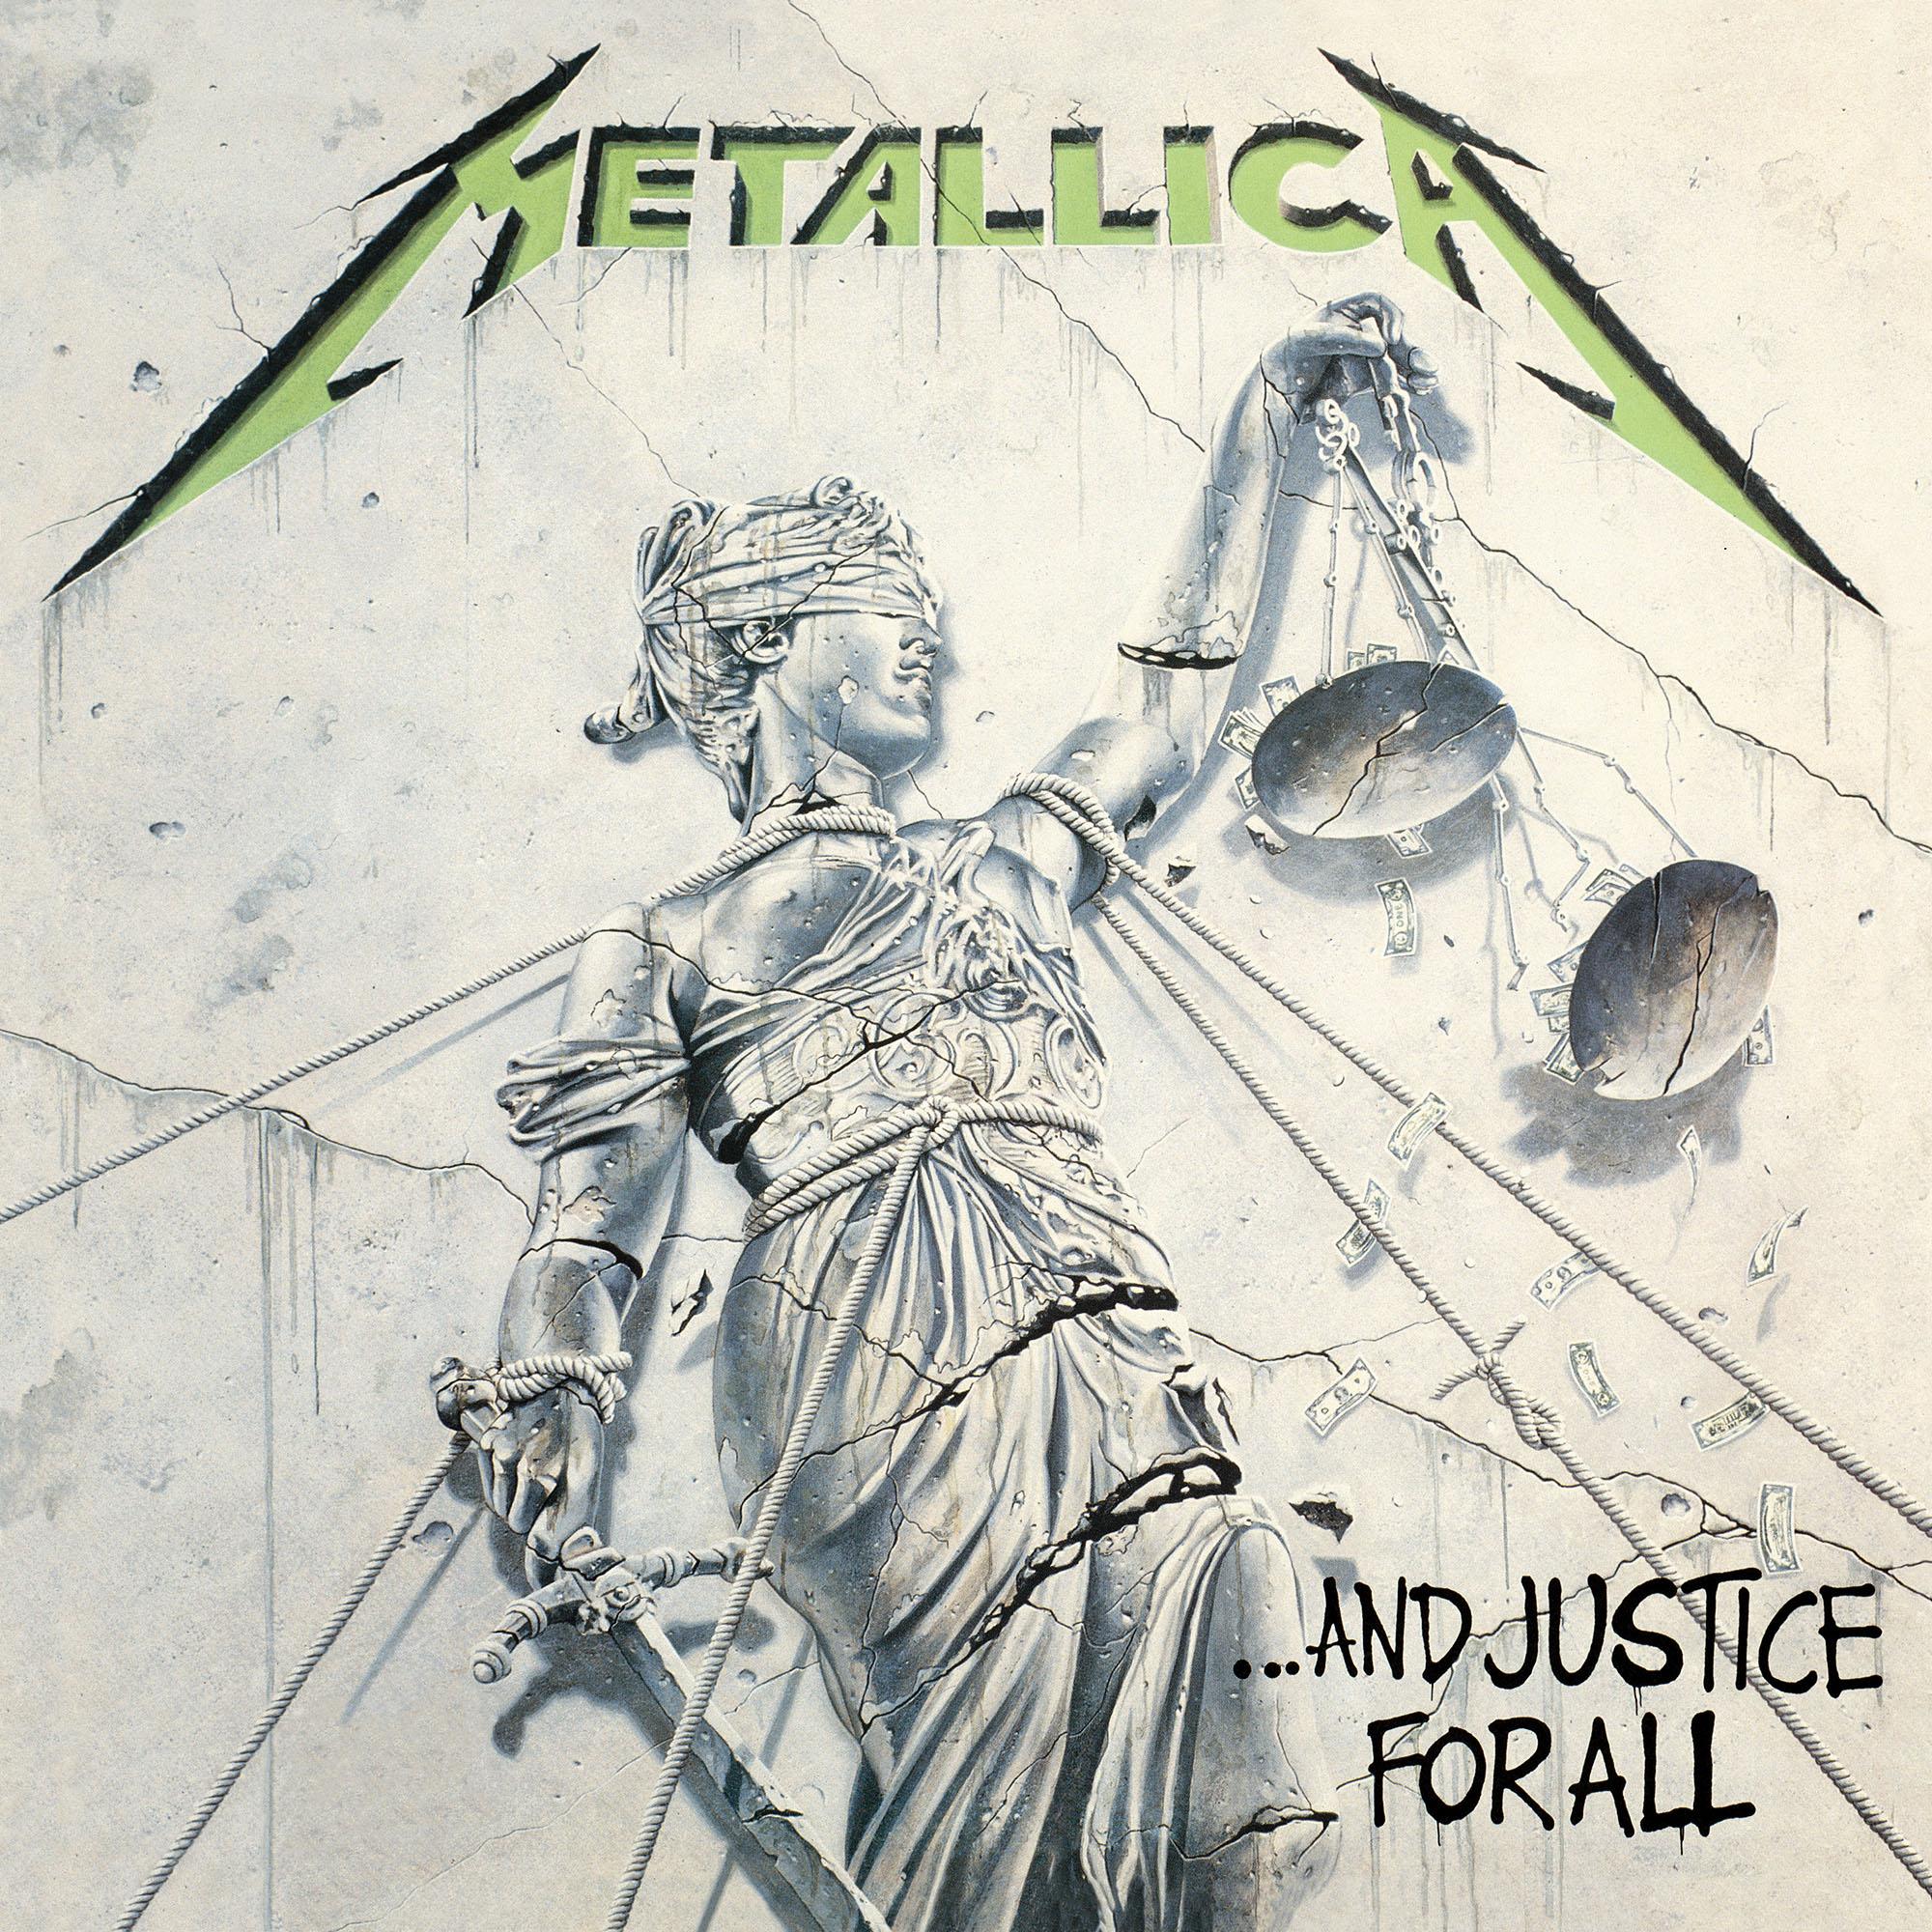 And Justice For All album art